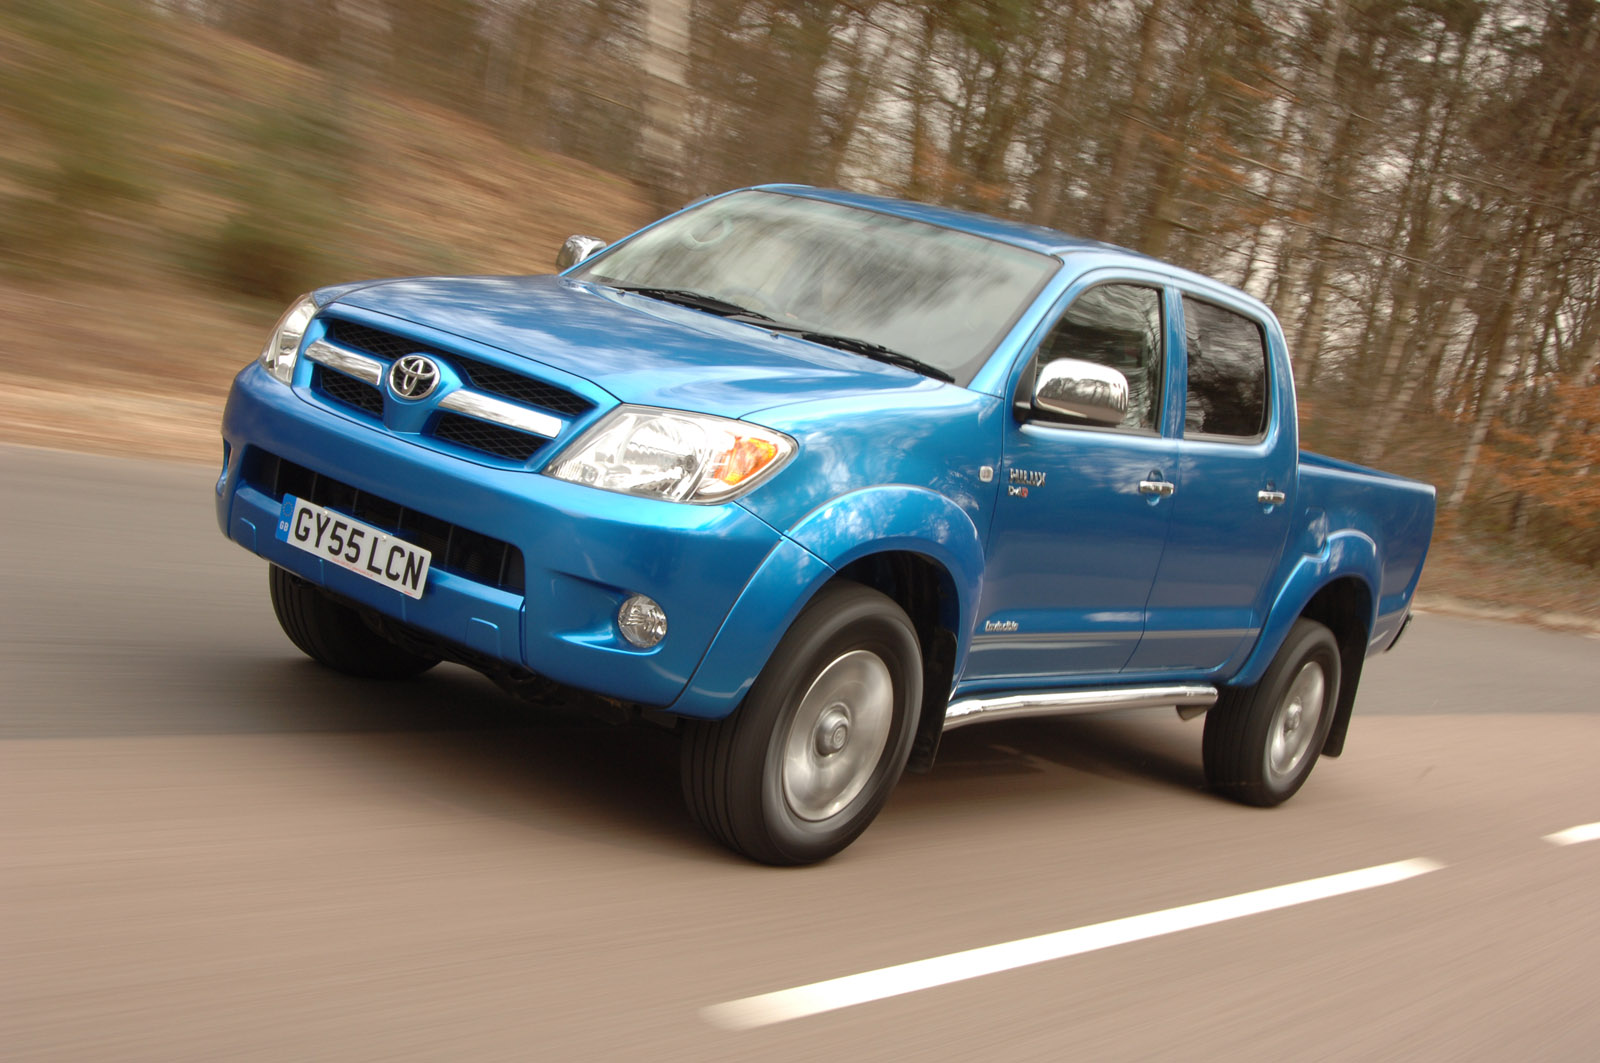 Used car buying guide: Toyota Hilux | Autocar